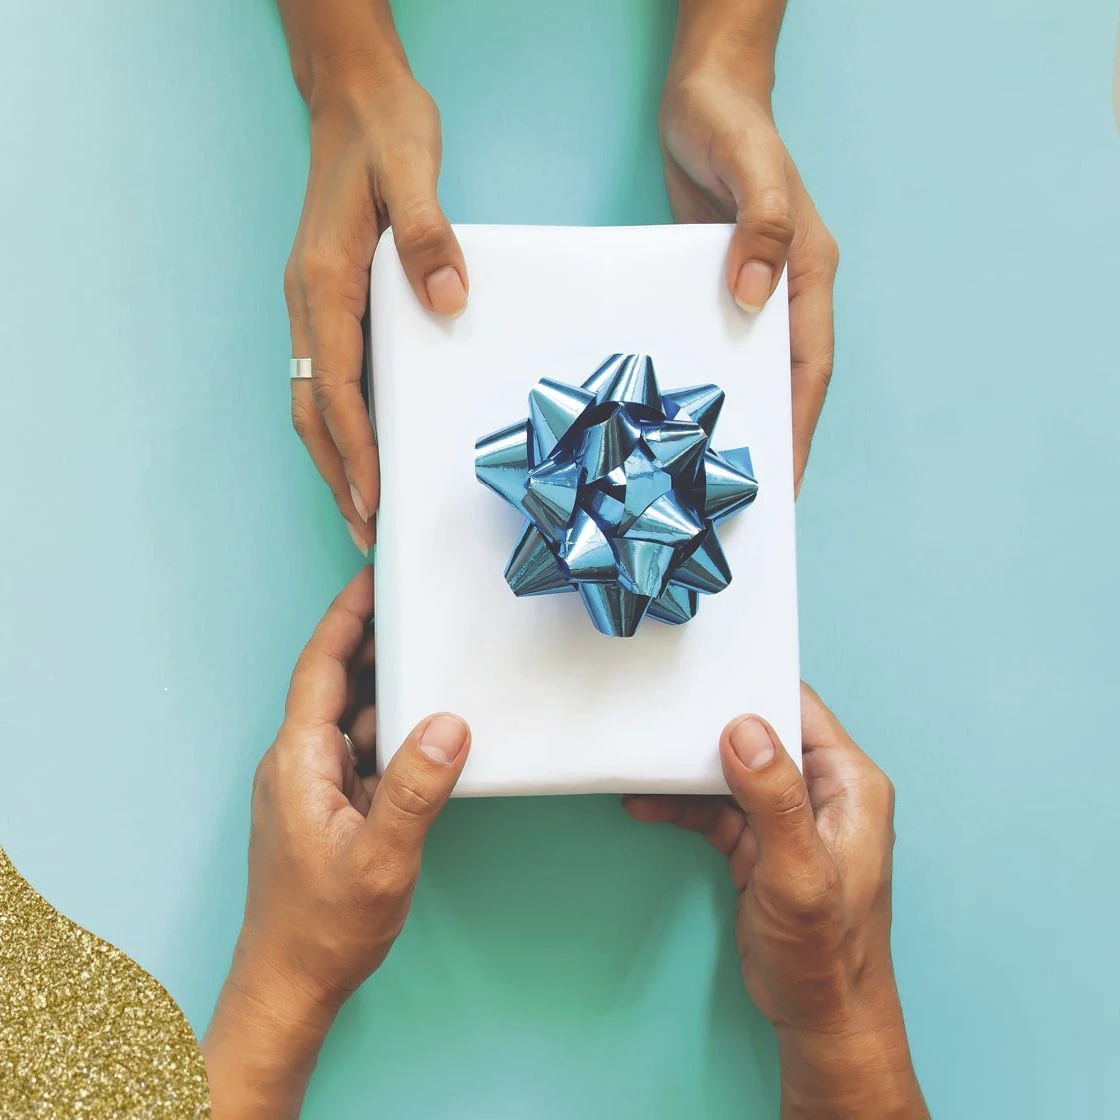 5 women on what makes the perfect gift